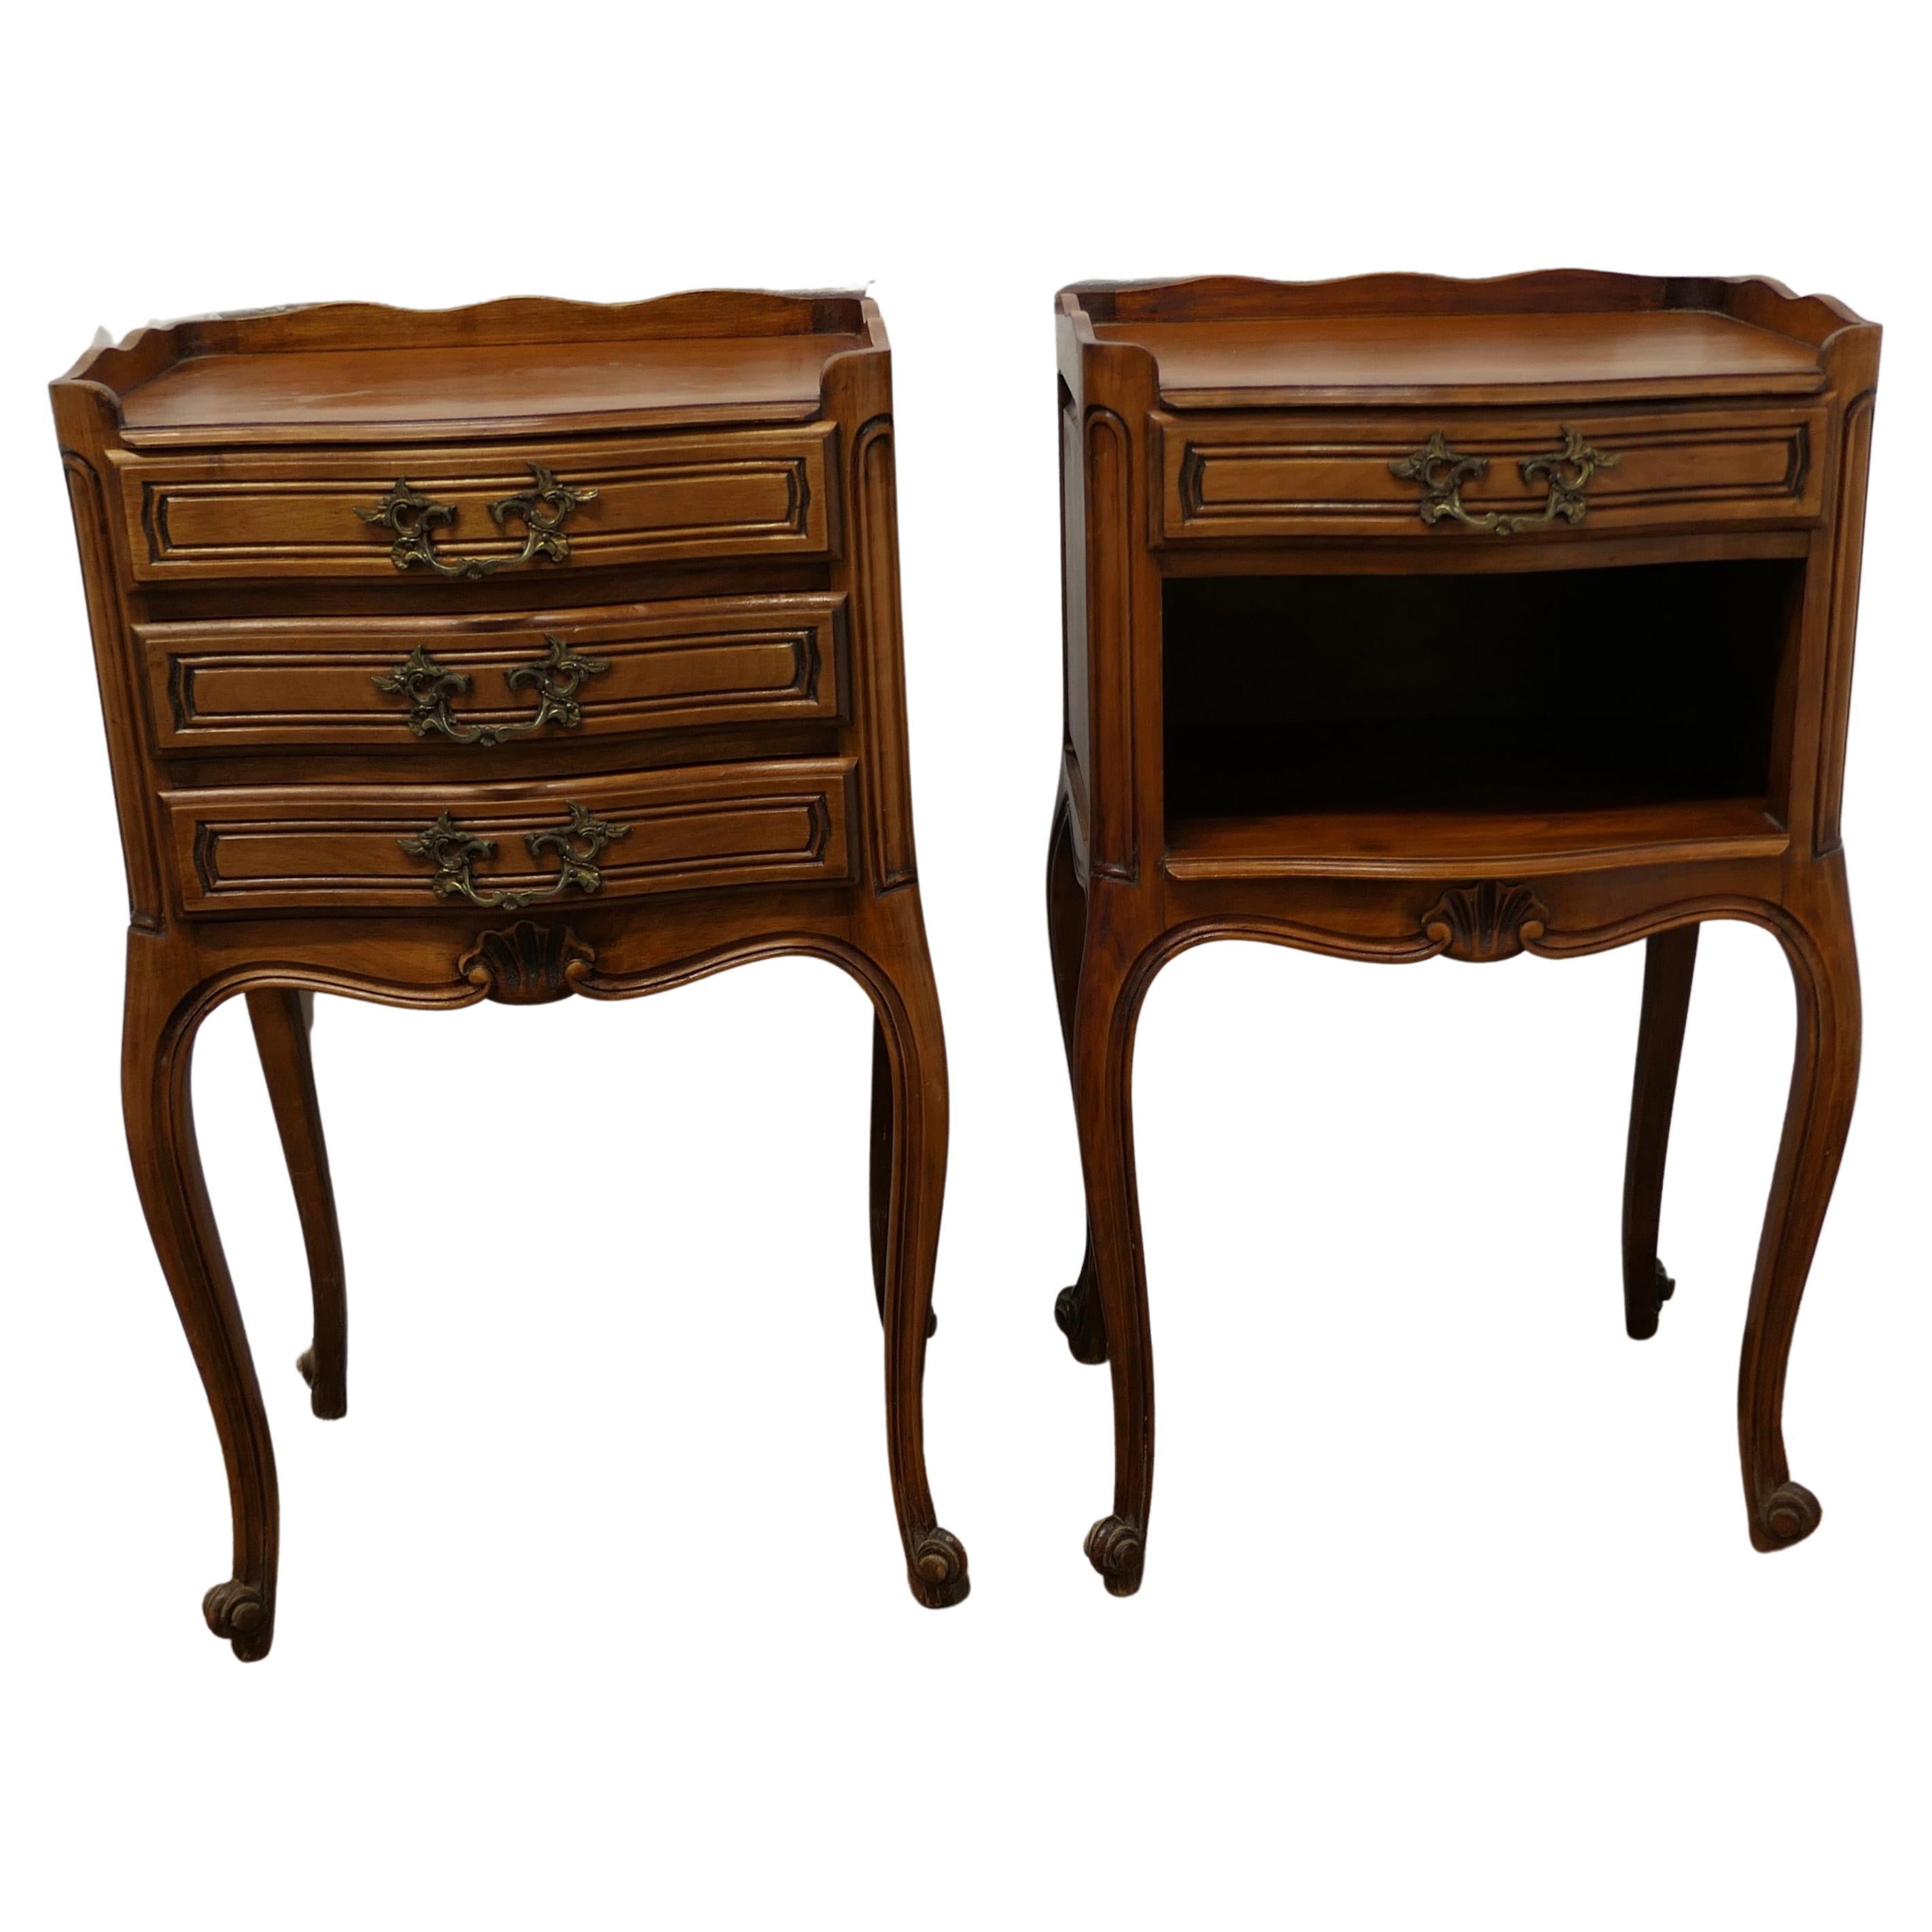 Pair of French Cherry Wood Bedside Cabinets or Cupboards